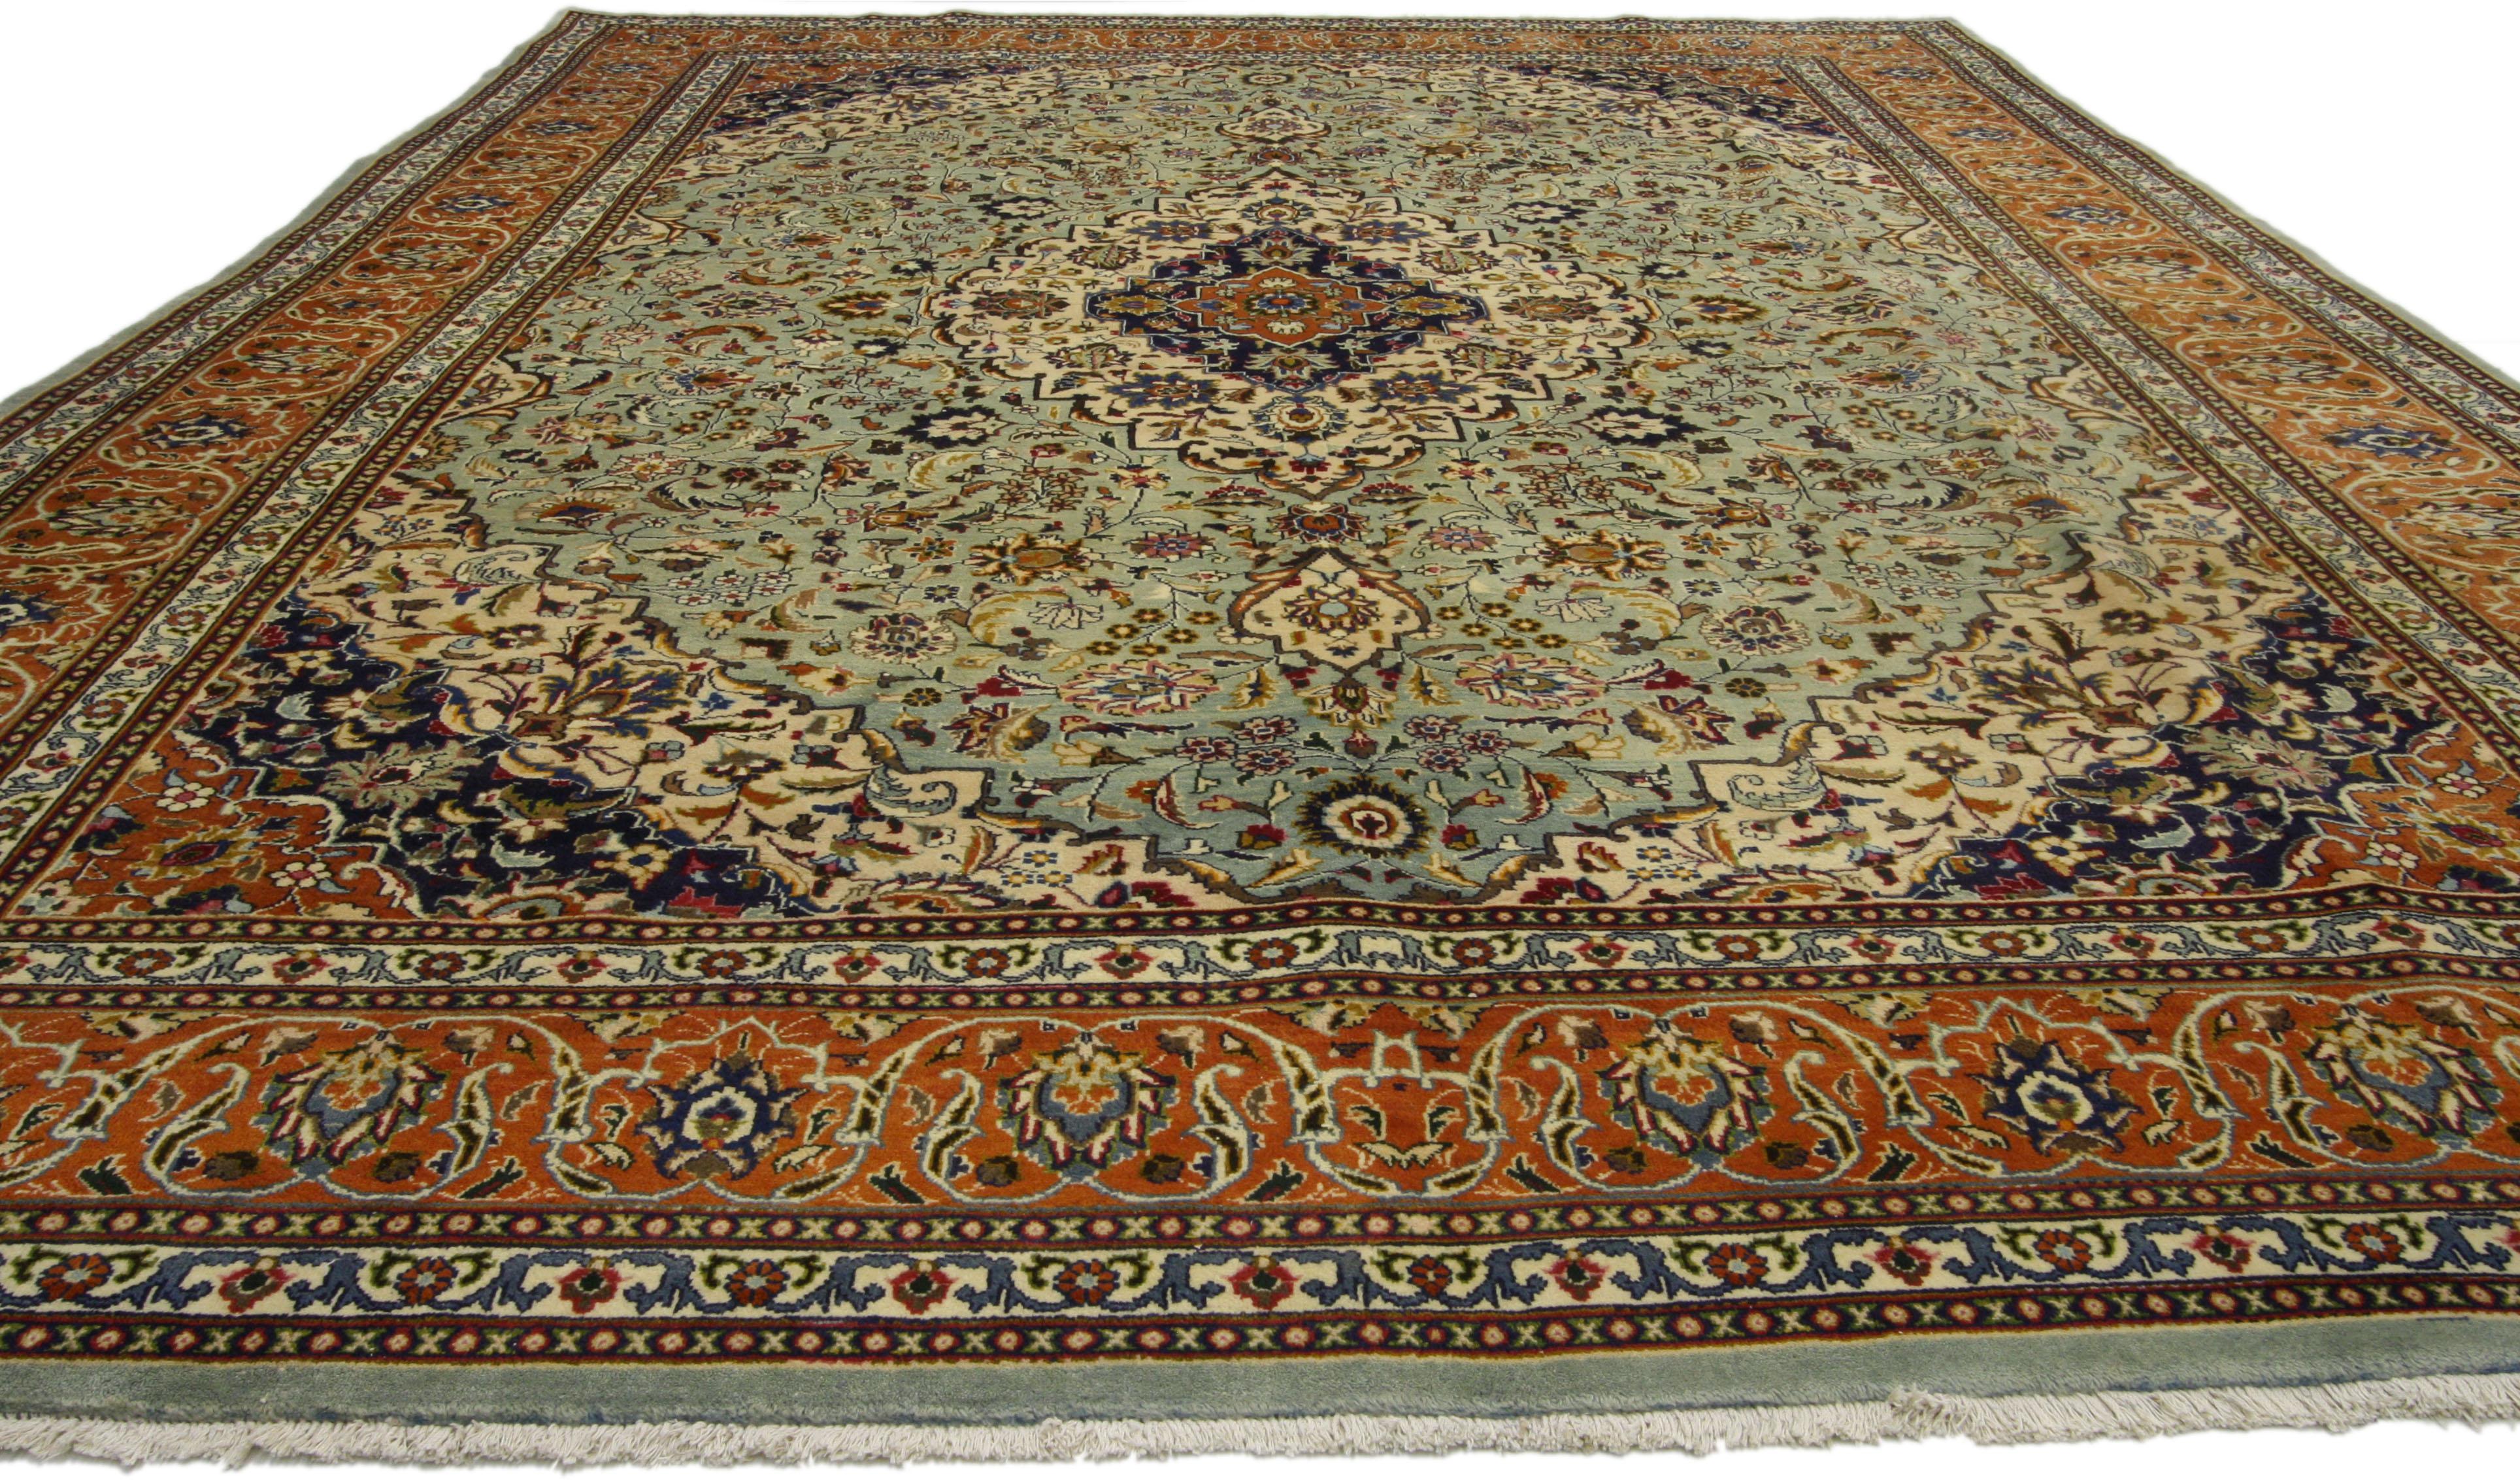 76496, vintage Persian Khorassan rug with traditional style. This hand-knotted wool vintage Persian Khorassan rug features a central lobed medallion and complementary spandrels with an all-over arabesque floral pattern. It is surrounded by a